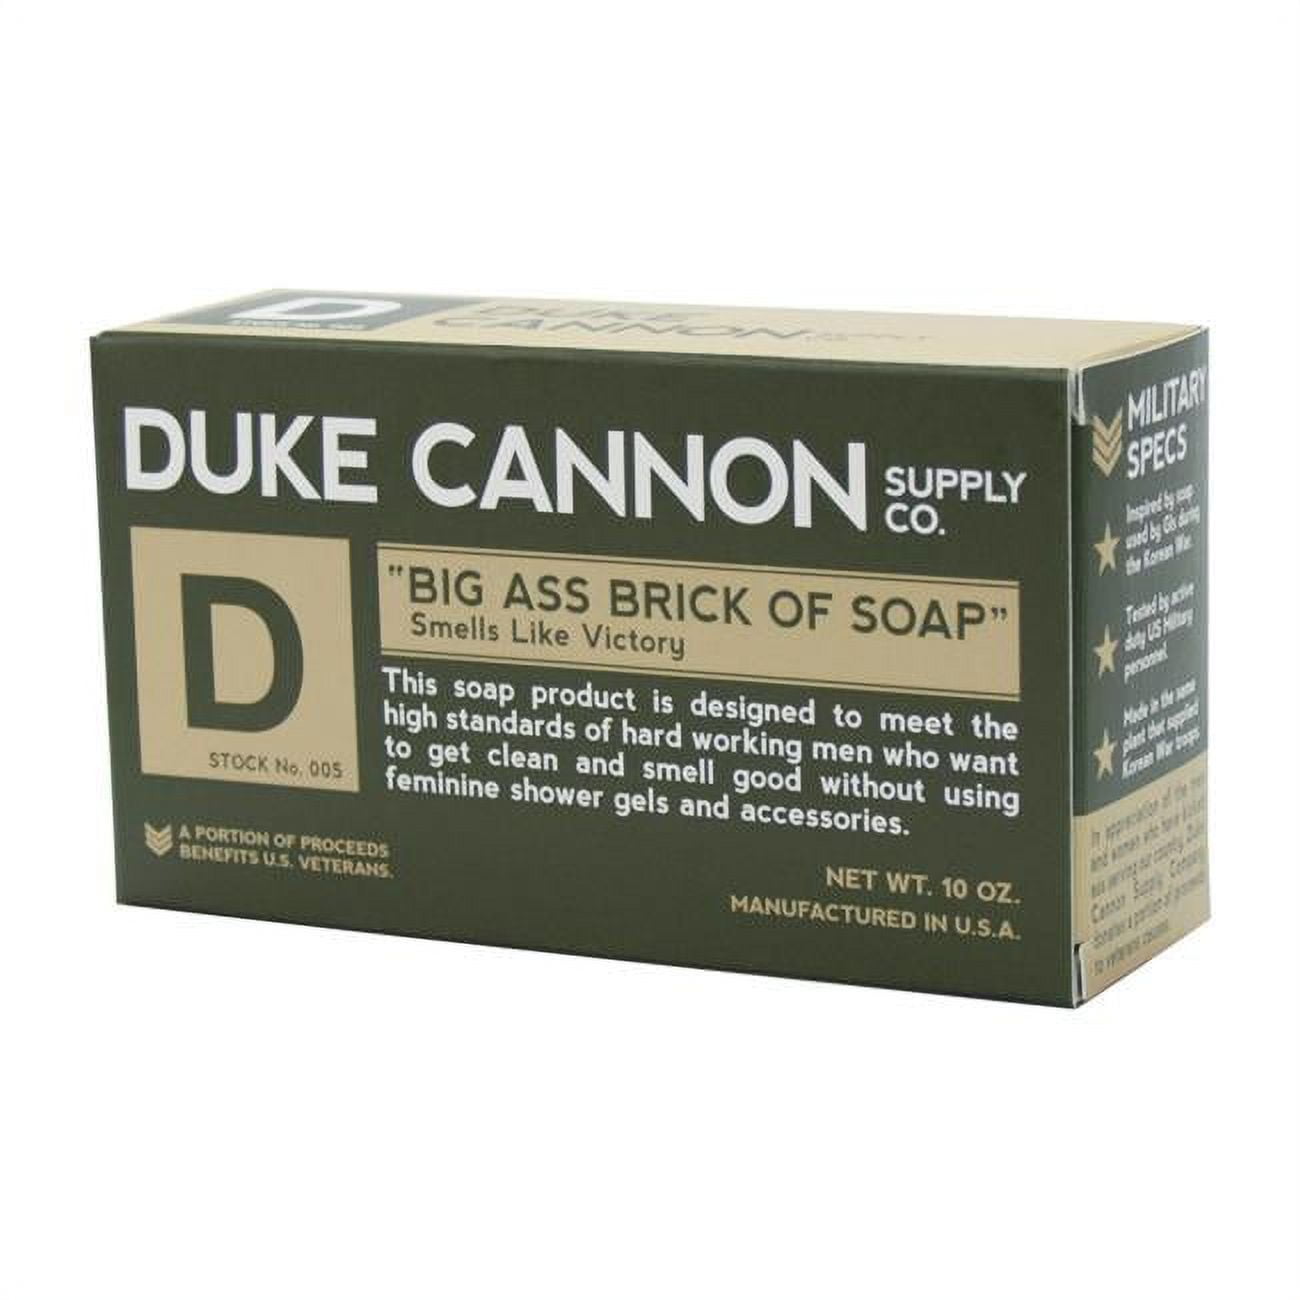 Picture of Big Ass Brick of Soap 9414392 10 oz Duke Cannon Bar Soap Smells Like Victory Scent